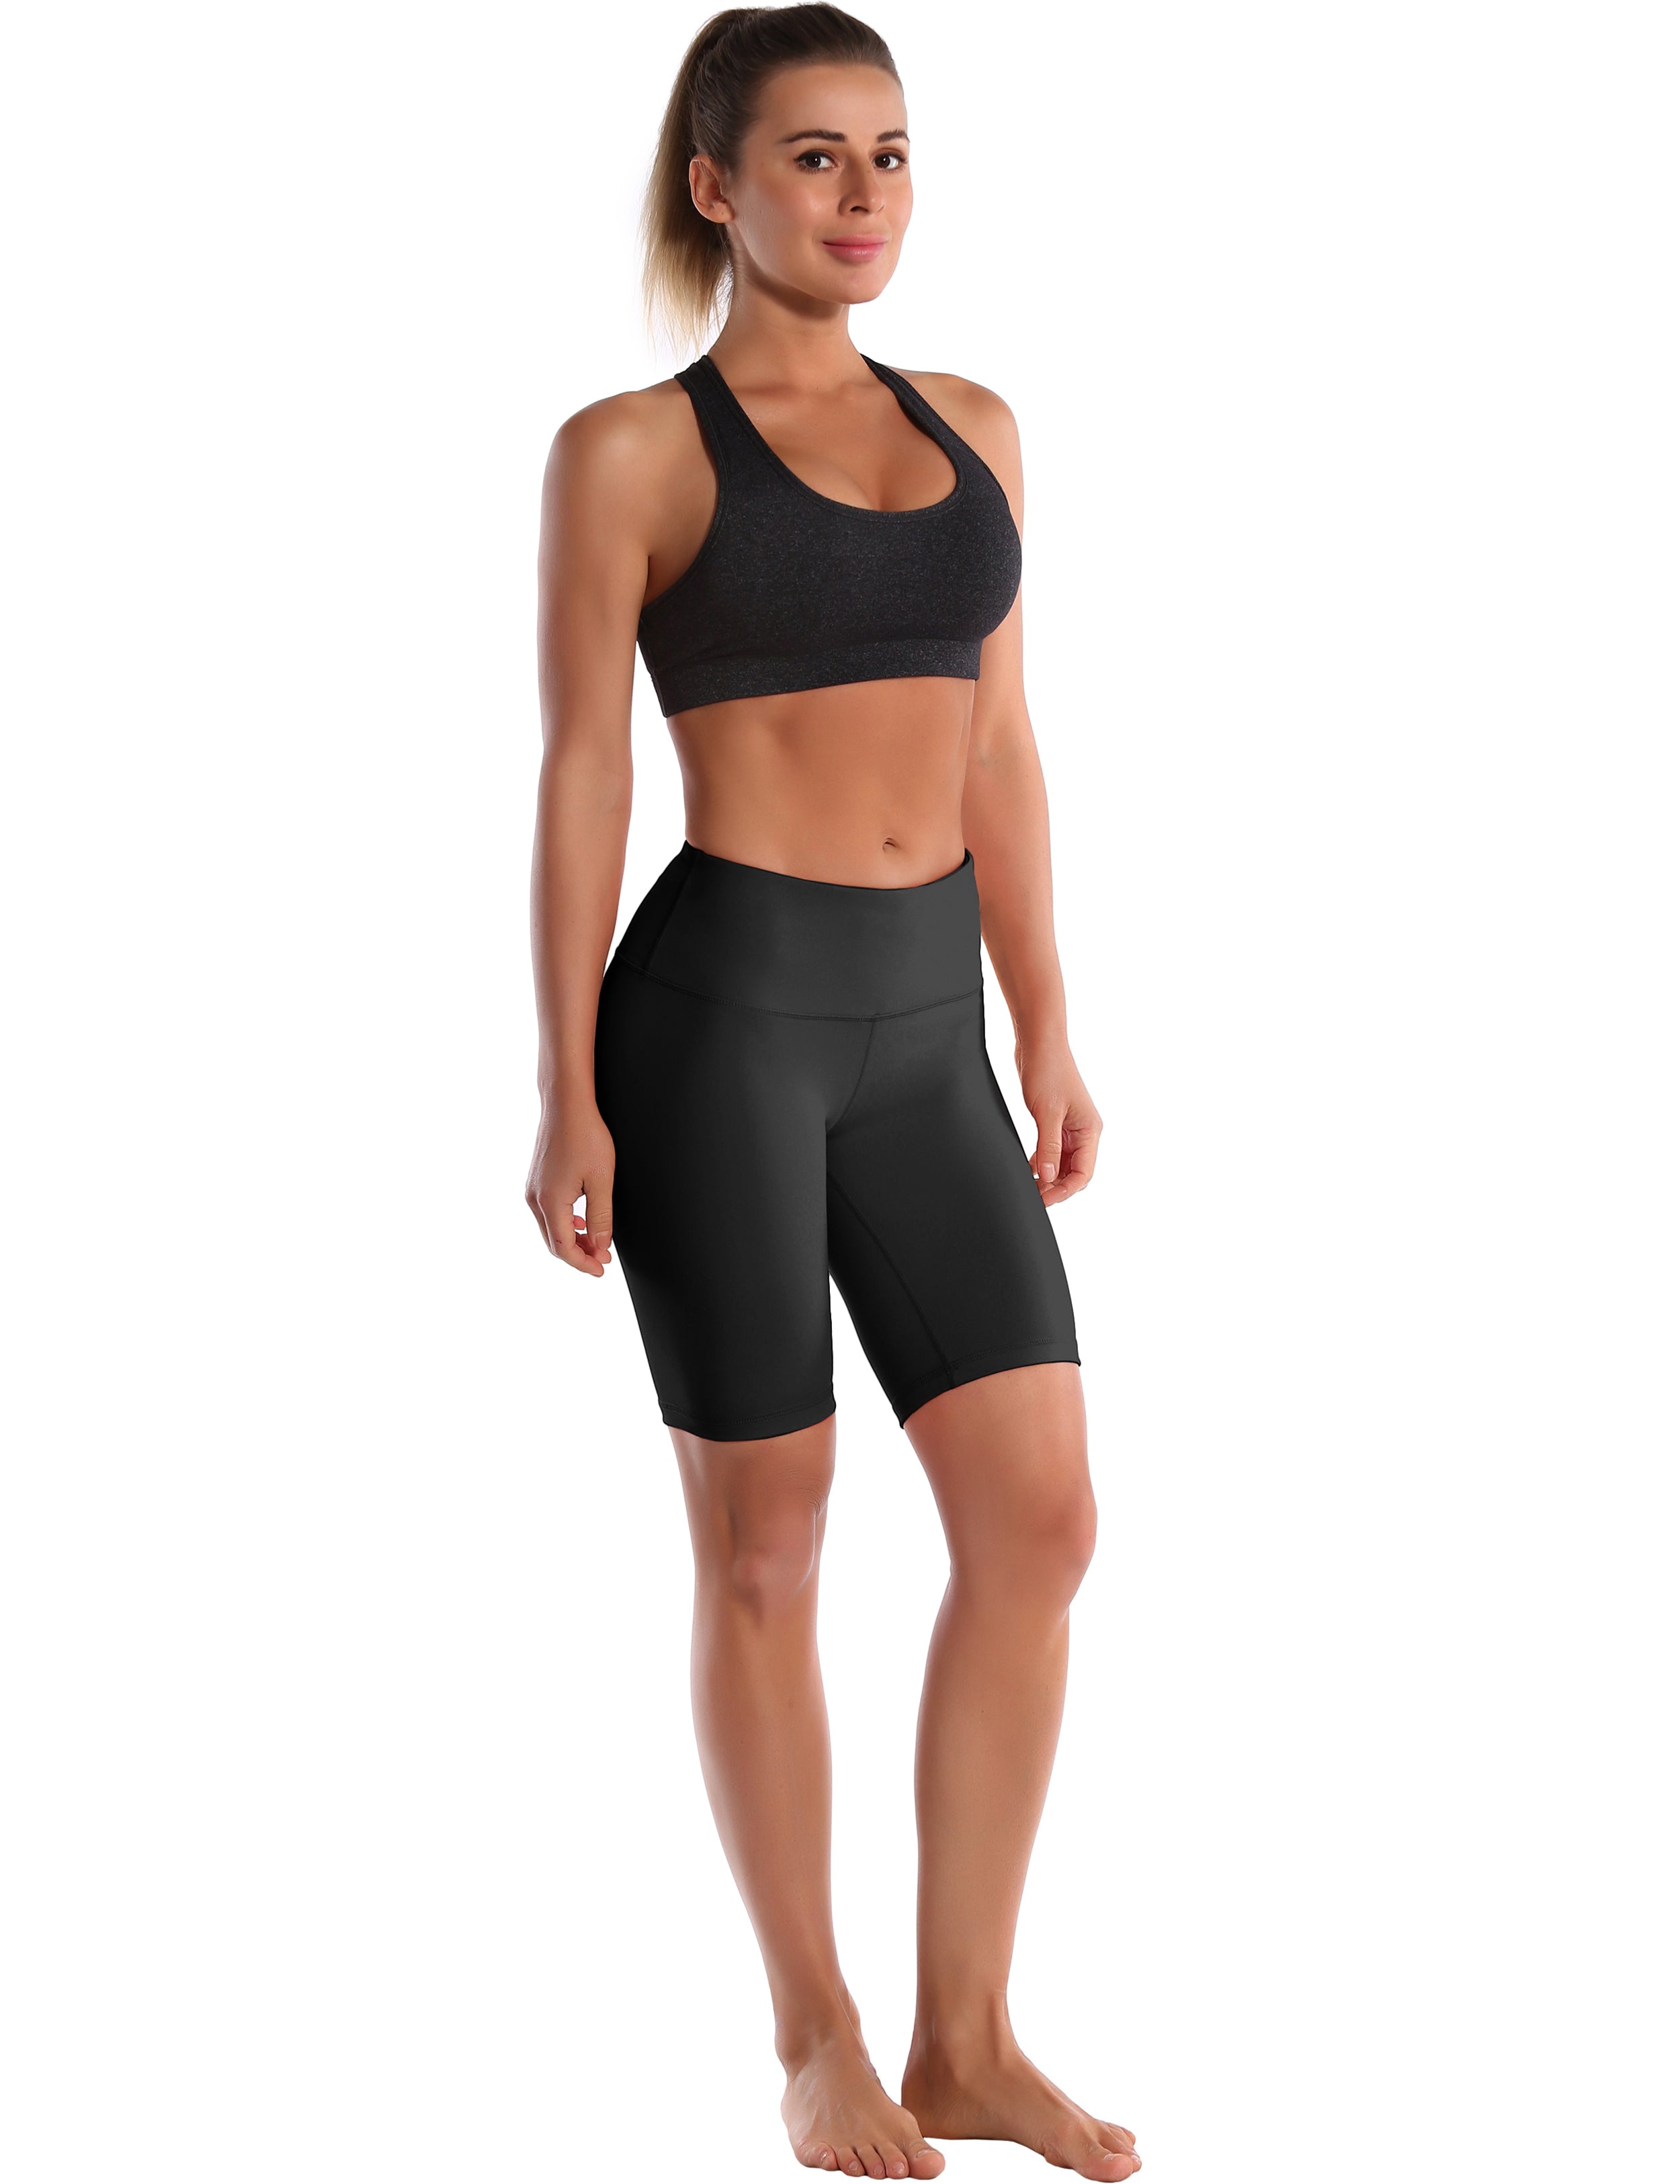 8" High Waist Tall Size Shorts black Sleek, soft, smooth and totally comfortable: our newest style is here. Softest-ever fabric High elasticity High density 4-way stretch Fabric doesn't attract lint easily No see-through Moisture-wicking Machine wash 75% Nylon, 25% Spandex